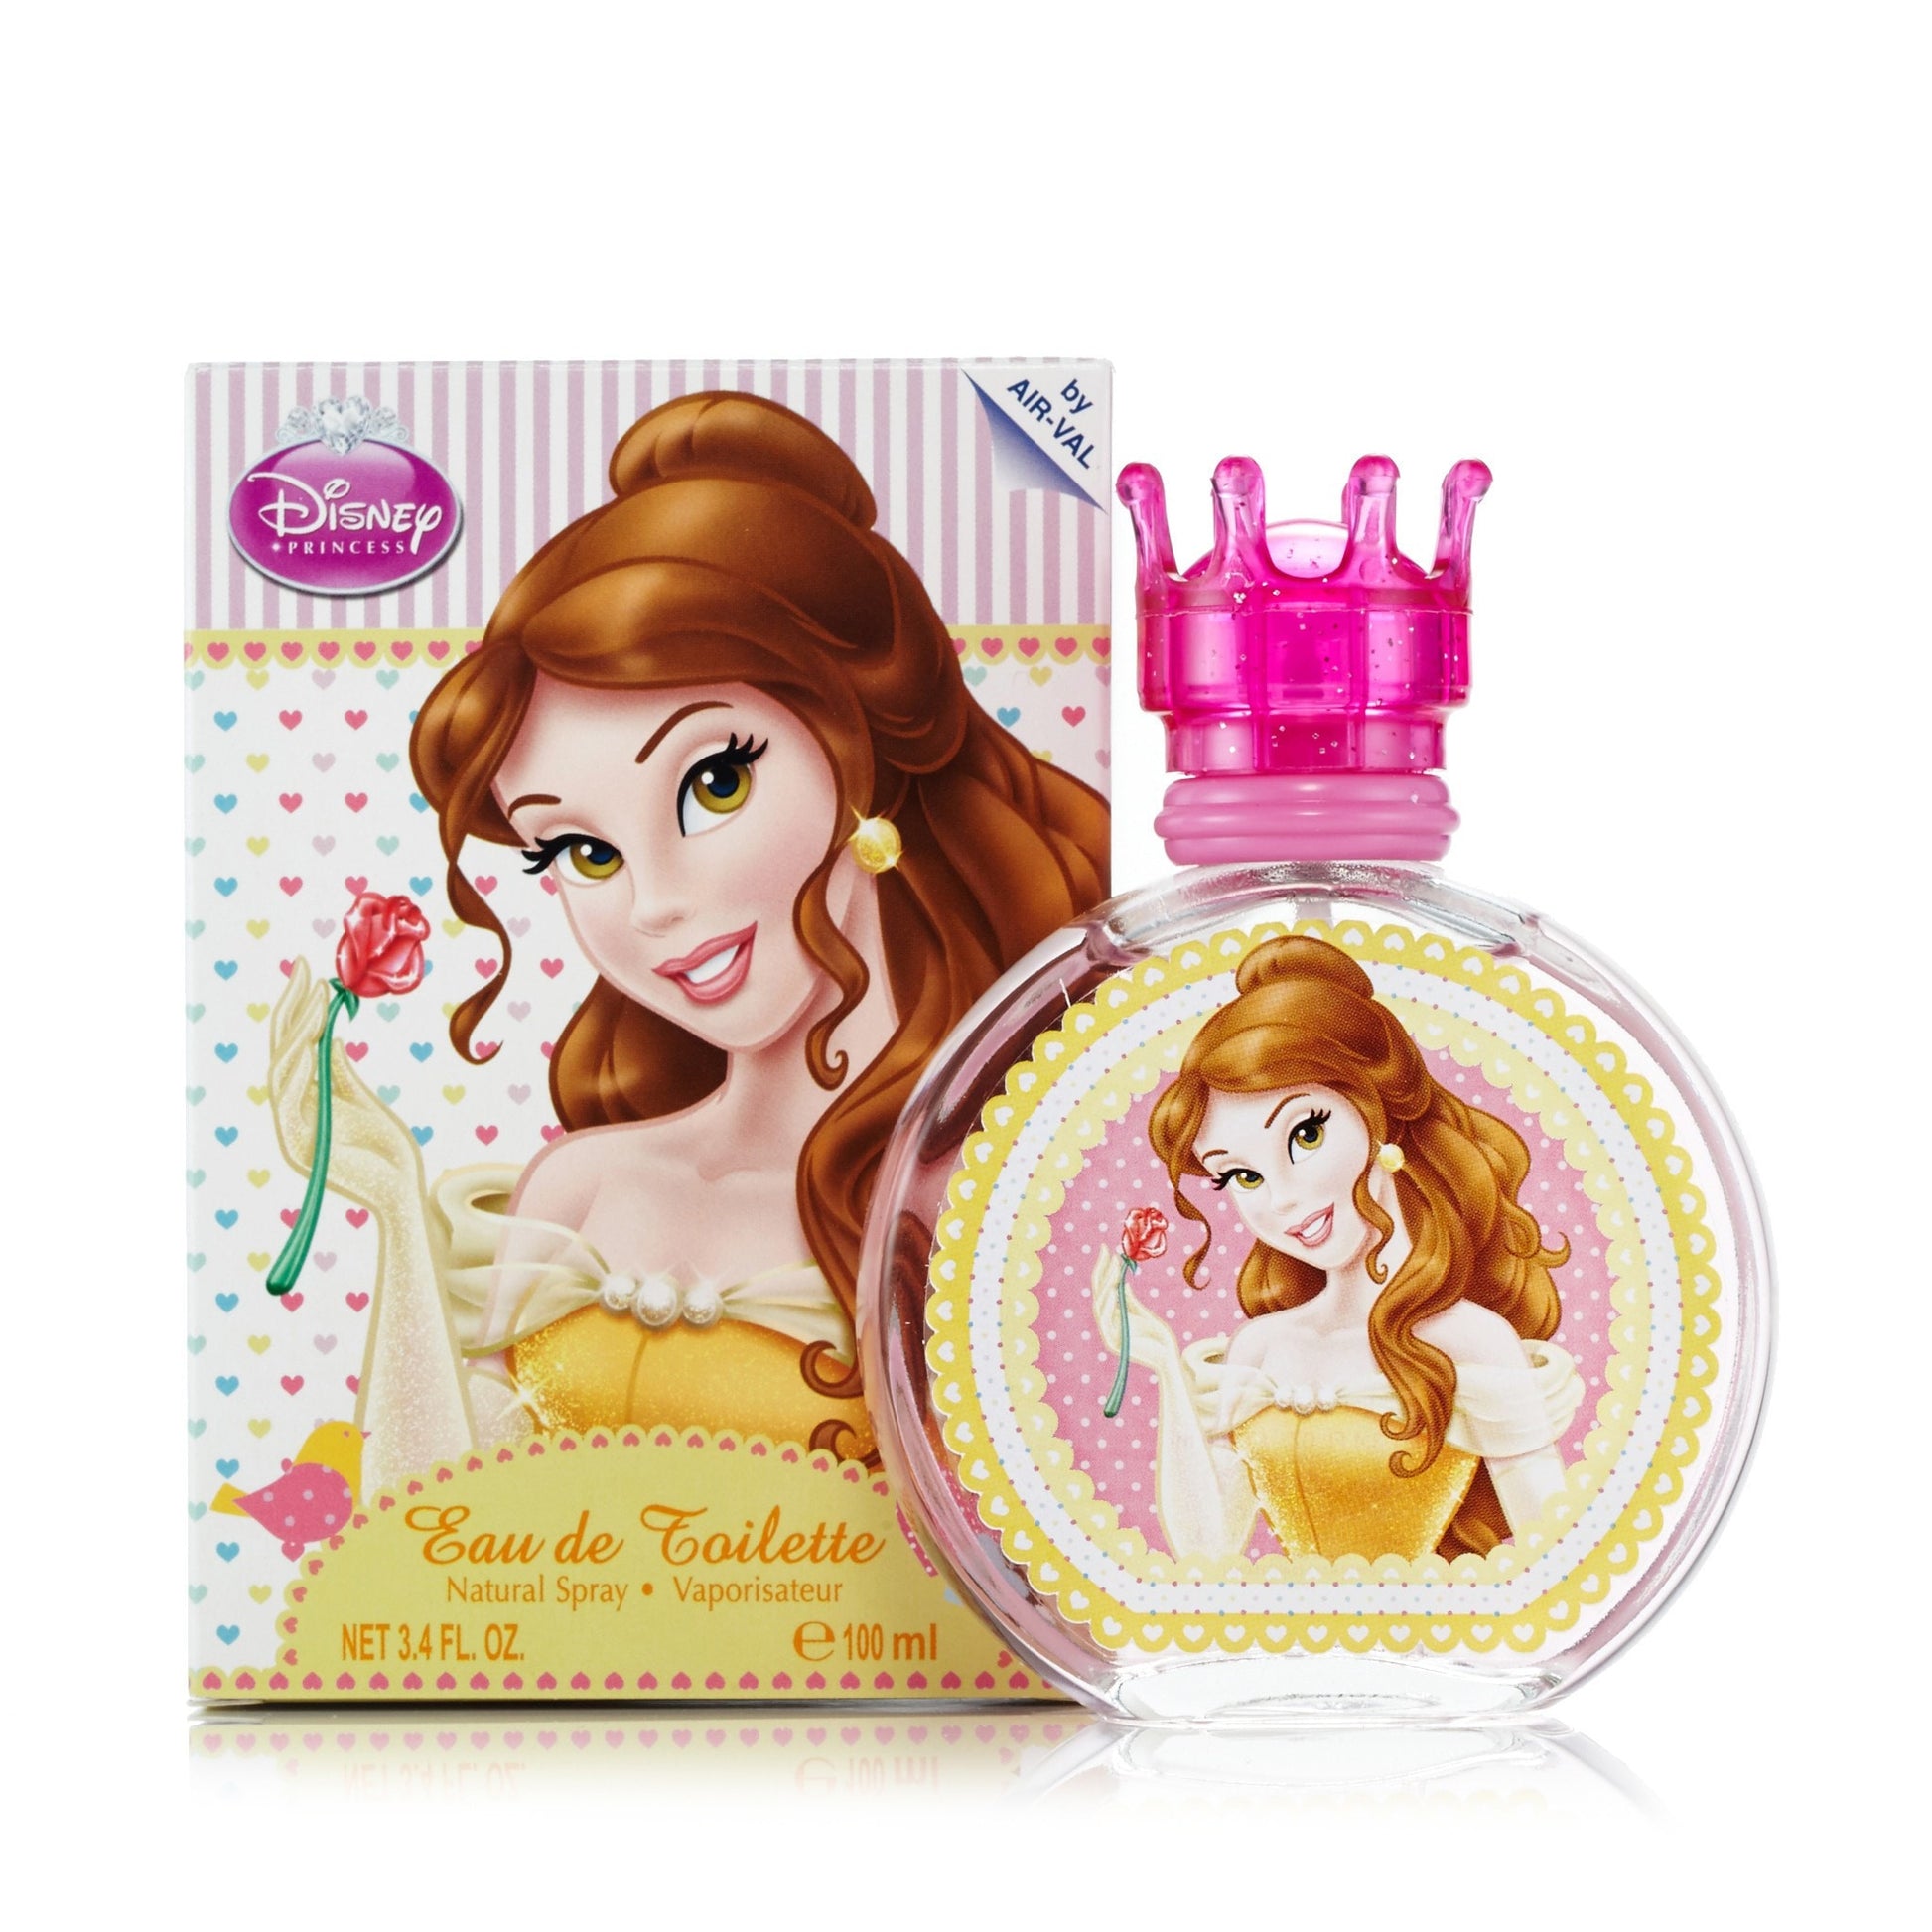 Beauty and the Beast Eau de Toilette Spray for Girls by Disney 3.4 oz. Click to open in modal